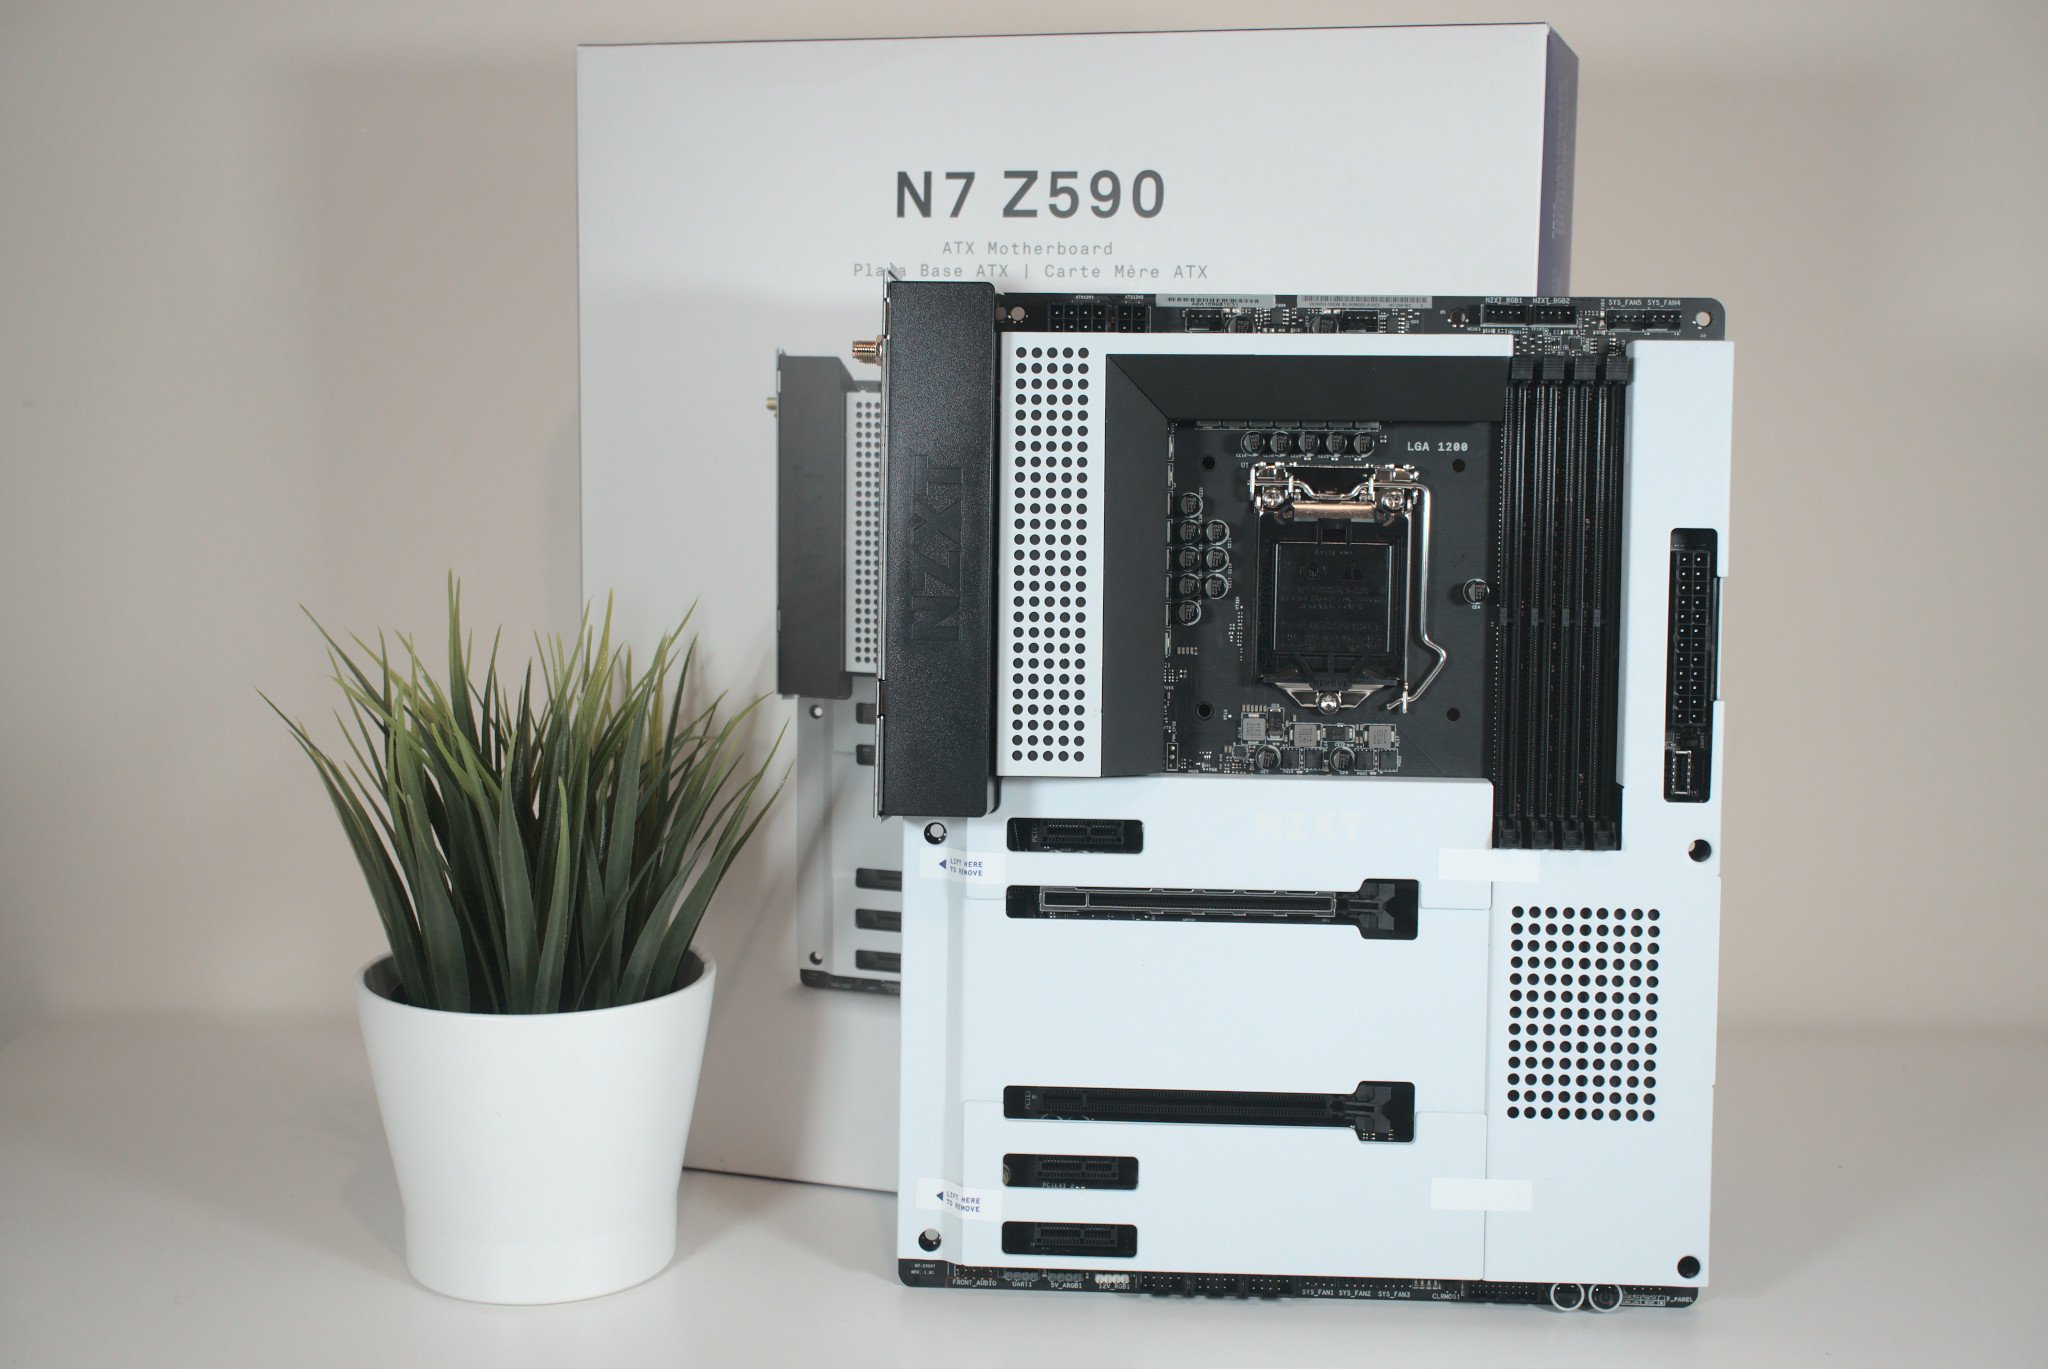 NZXT N7 Z590 review: The best-looking Intel motherboard receives a ...